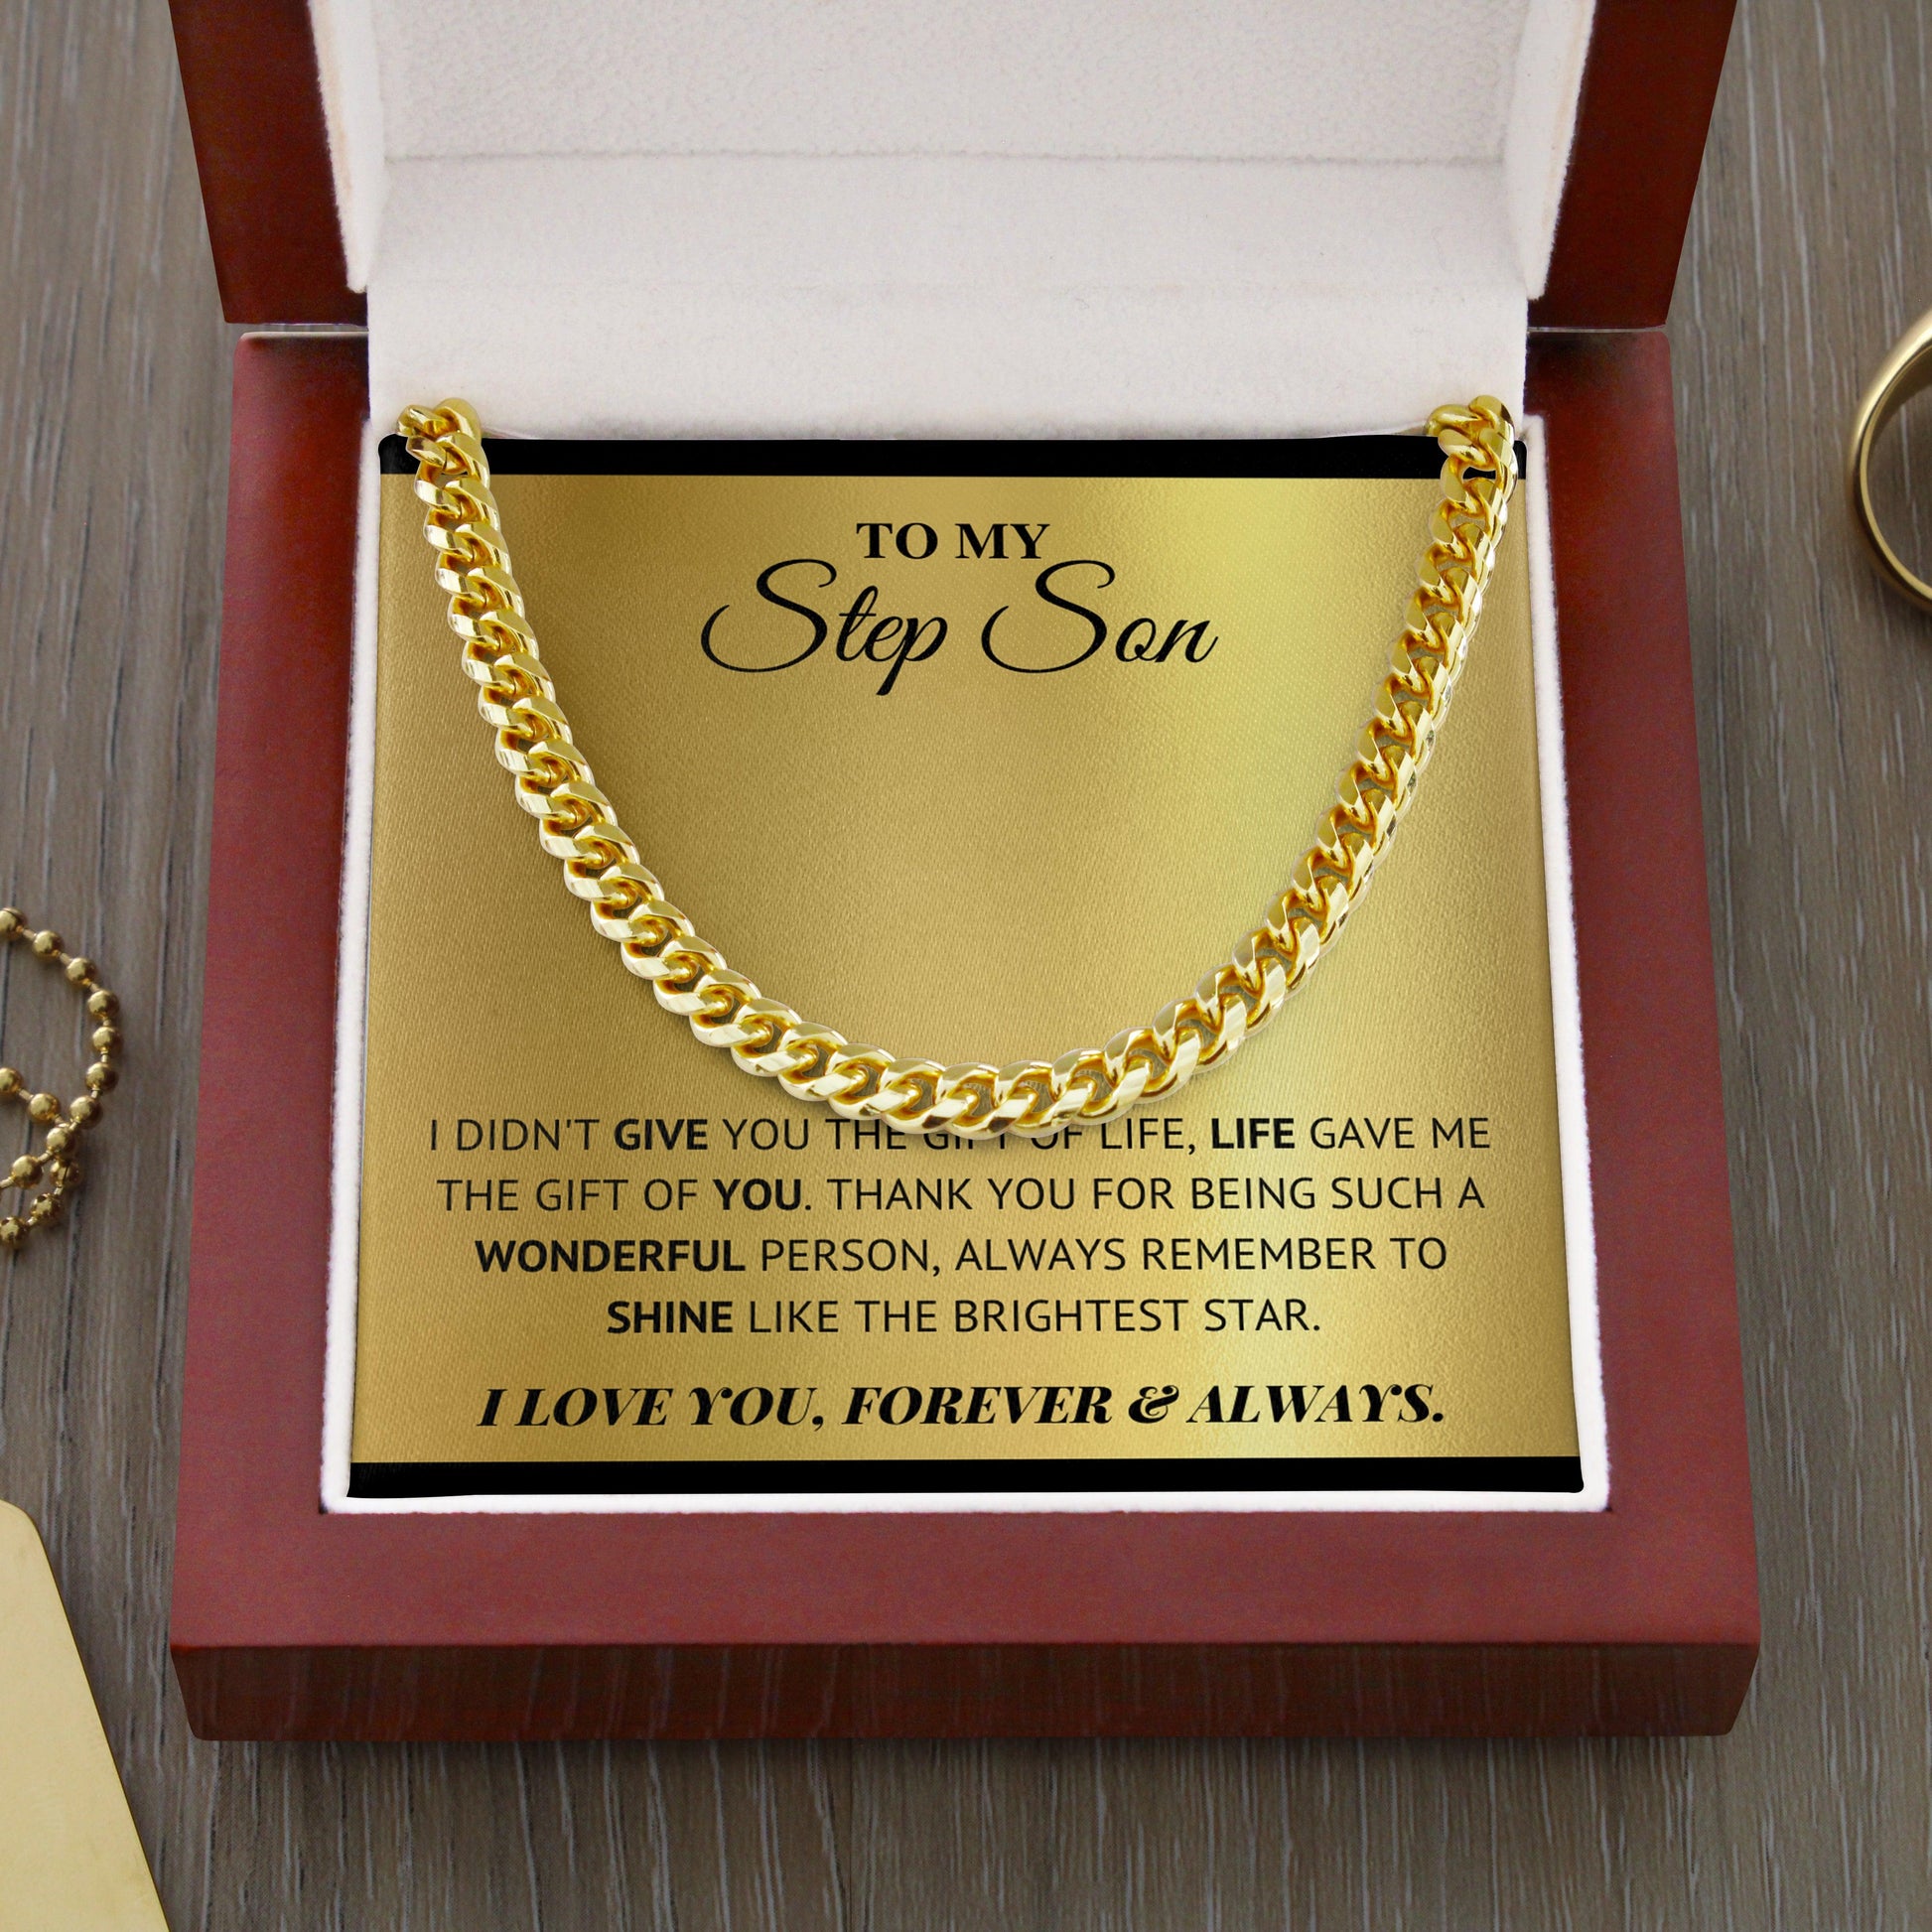 Jewelry gifts Stepson - Brighest Star - Cuban Link Chain - Belesmé - Memorable Jewelry Gifts 